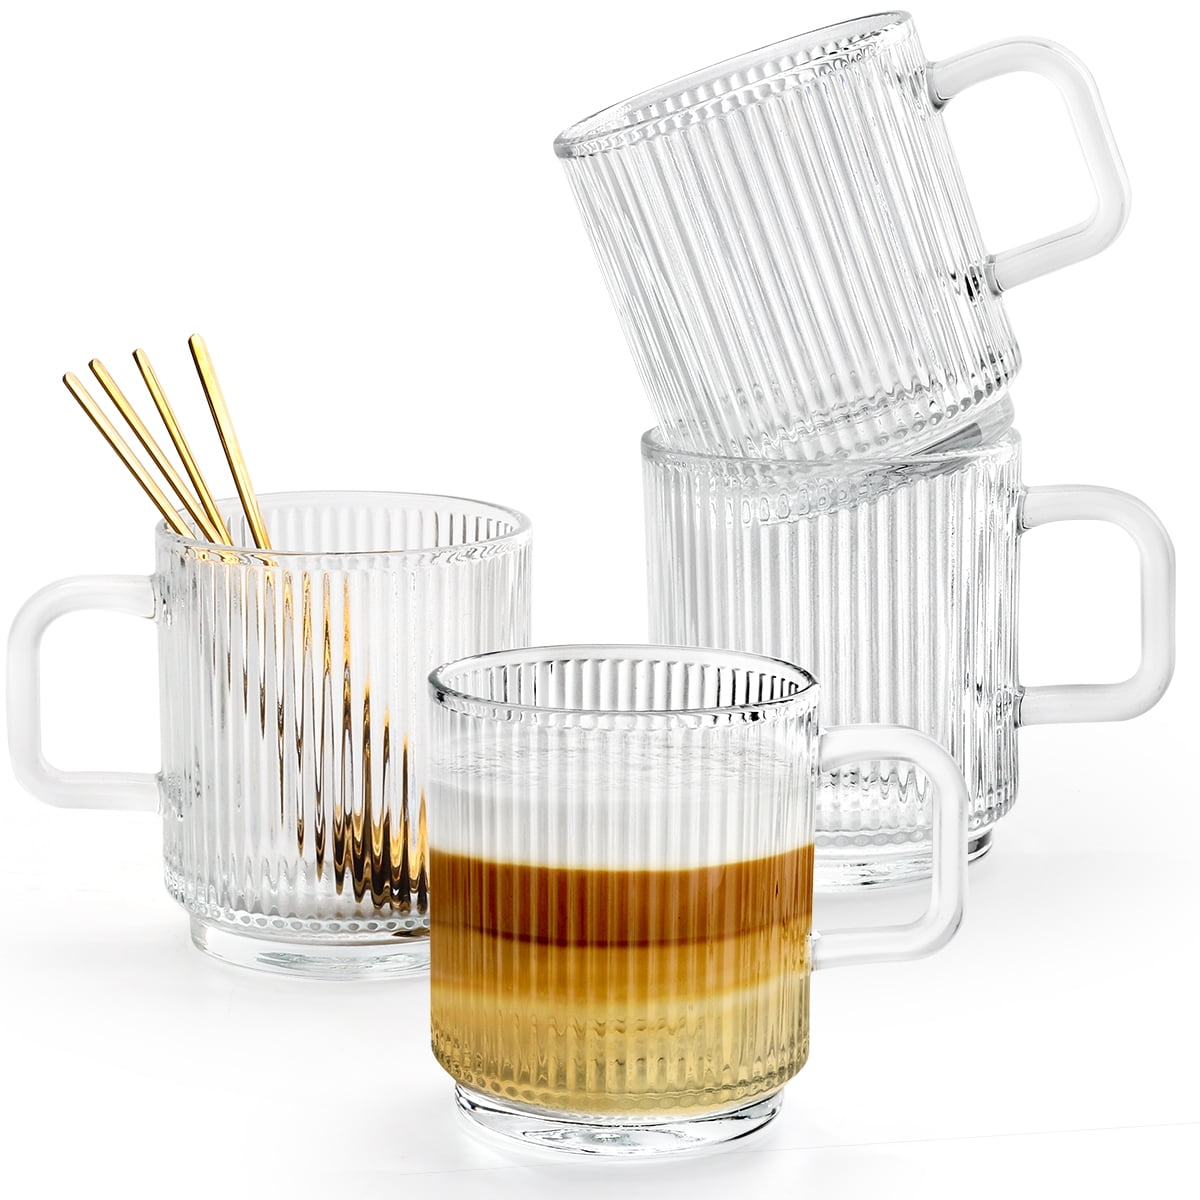 NutriChef 4 Pcs. of Clear Glass Coffee Mug - Elegant Clear Glasses with  Convenient Handles, For Hot and Cold Drinks